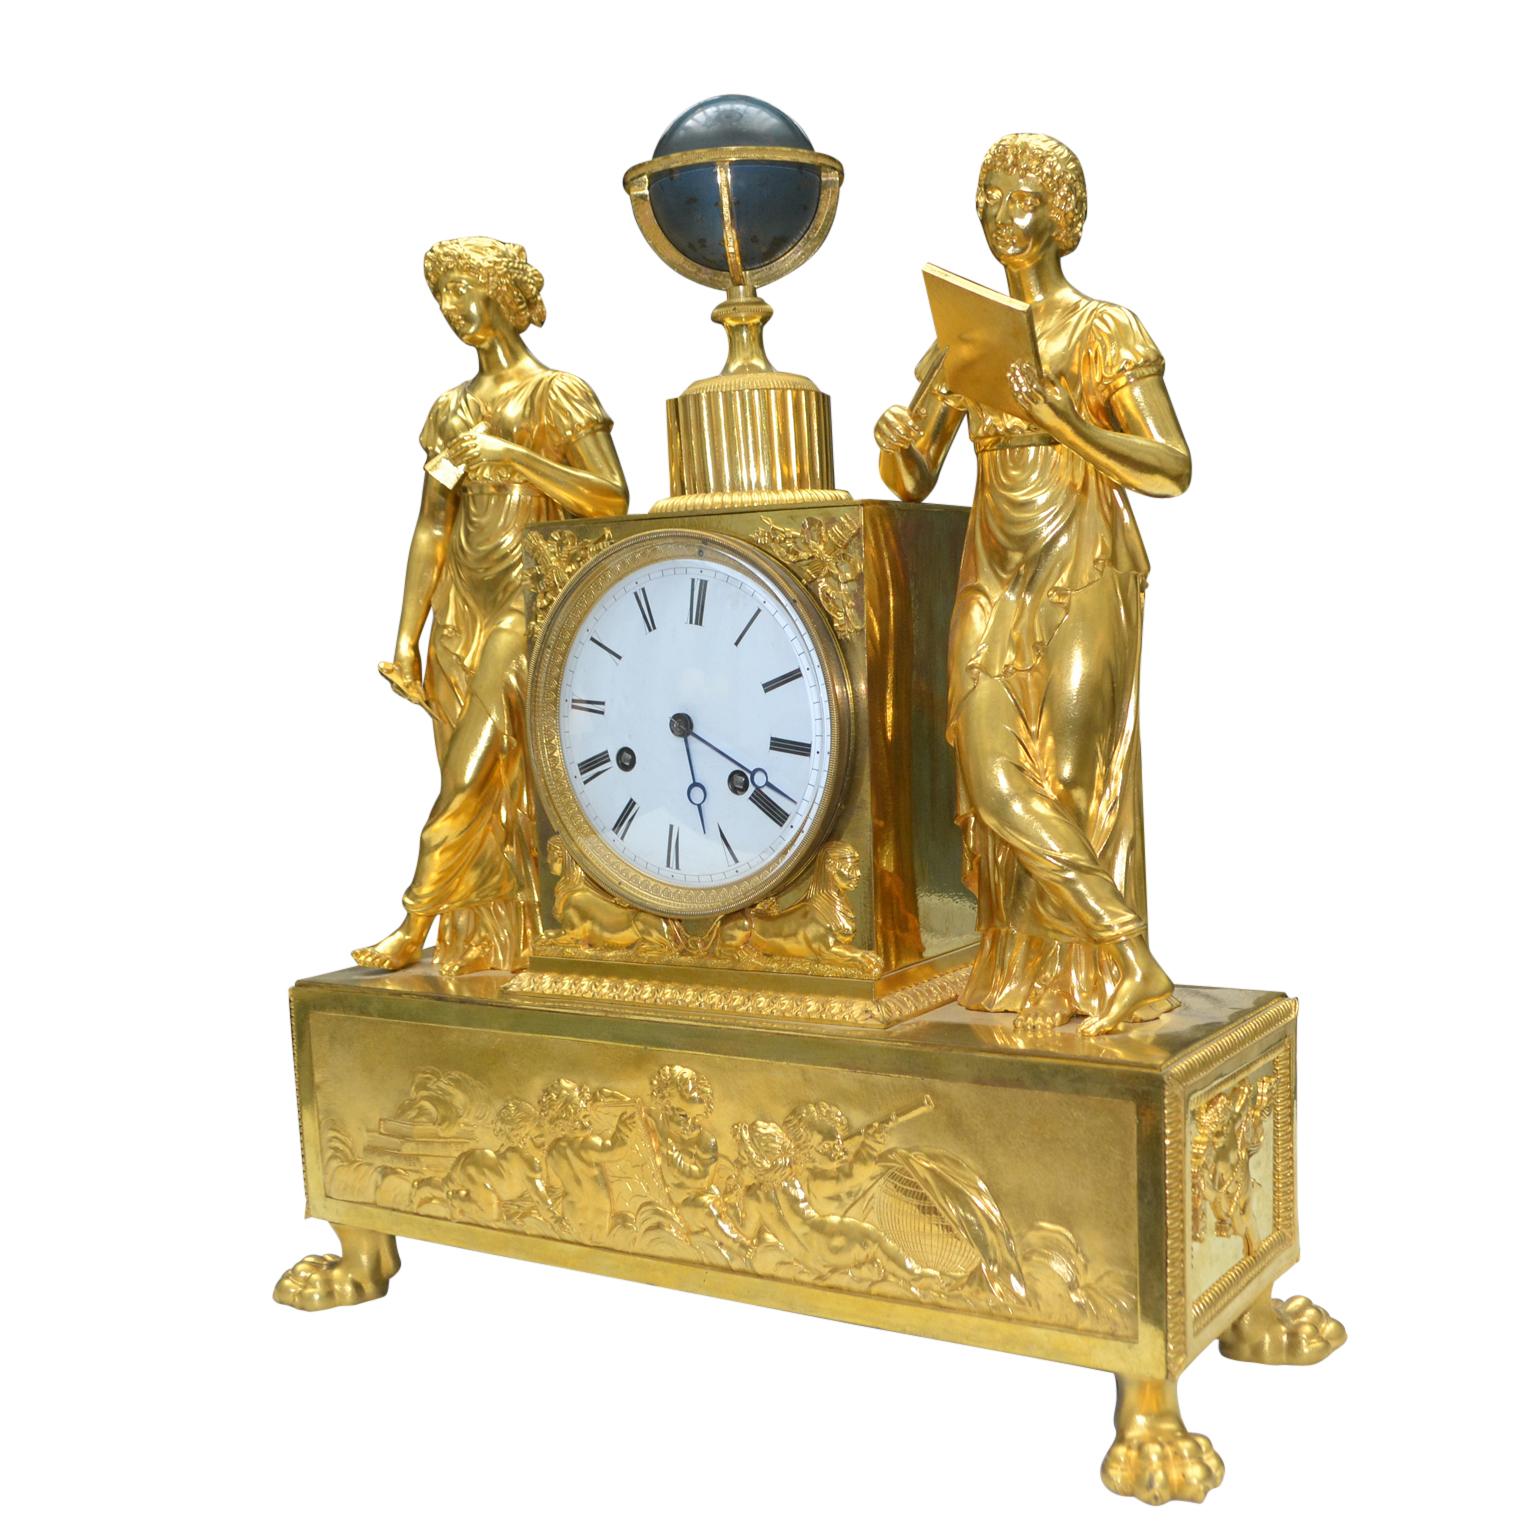 A fine early 19th century French Empire gilt bronze clock representing an allegory of astronomy; featuring two classically draped maidens standing on either side of a pedestal containing the clock movement which is surmounted by a celestial globe